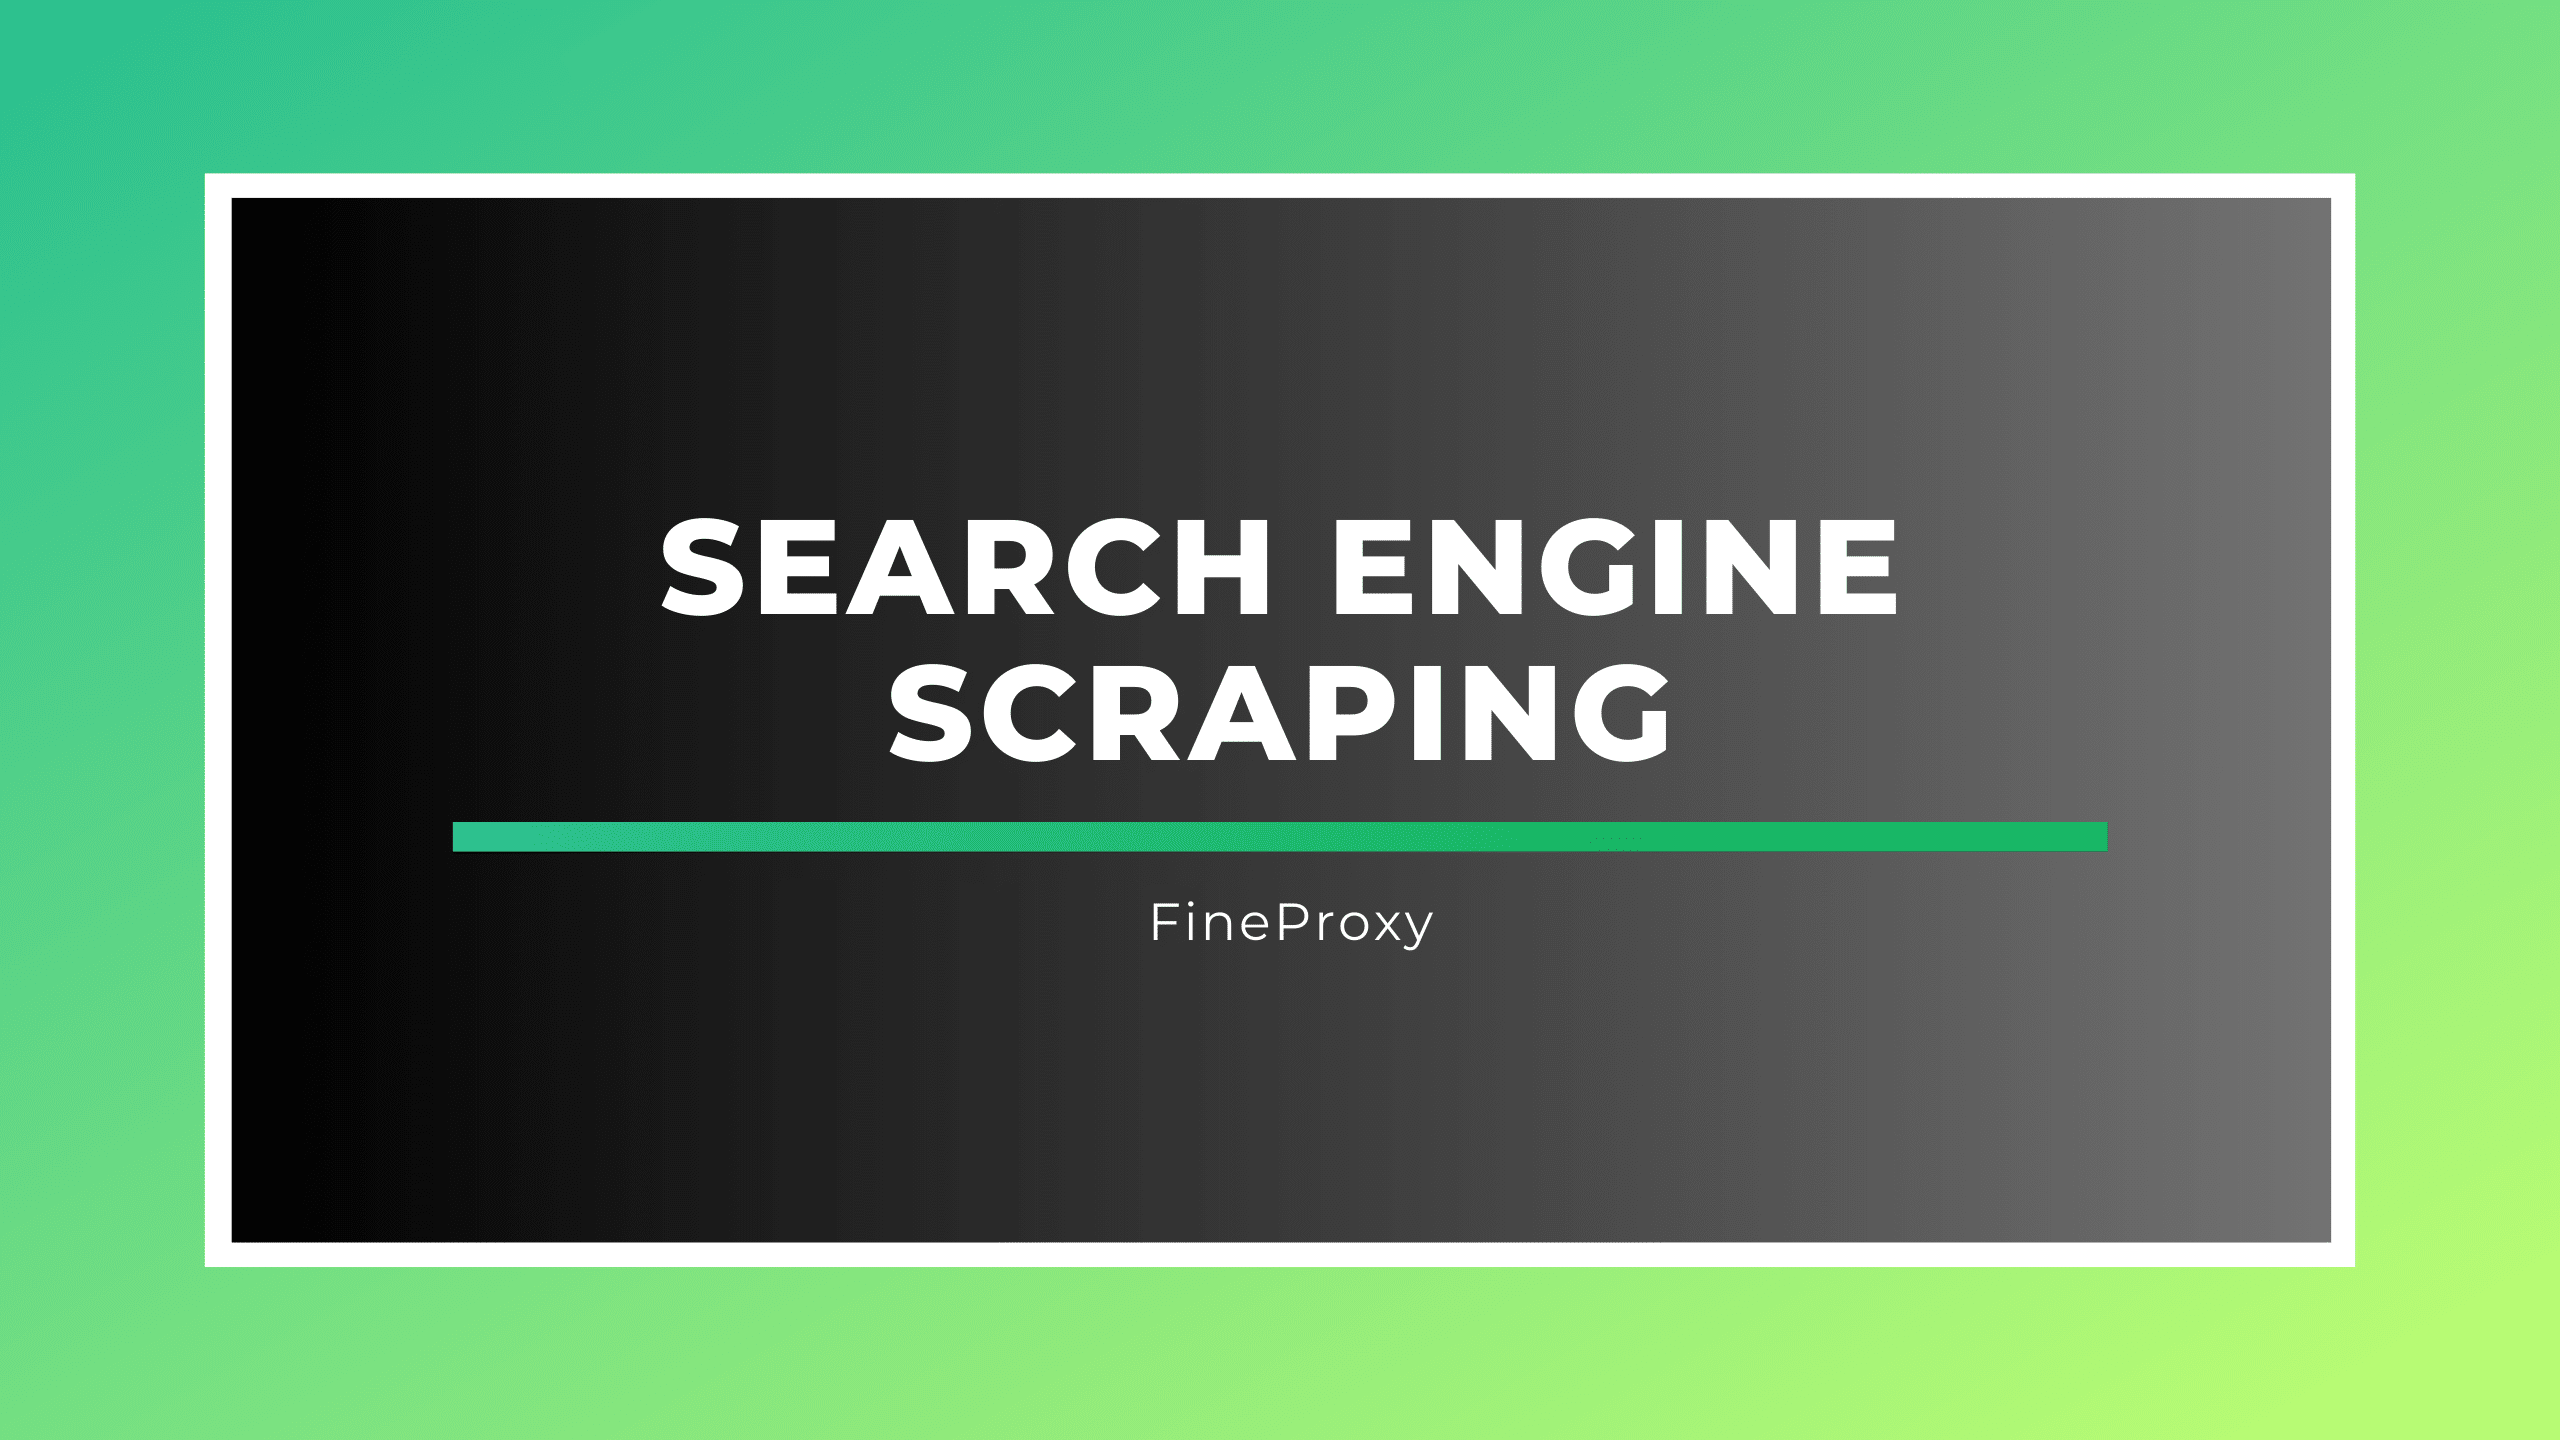 Search Engine Scraping